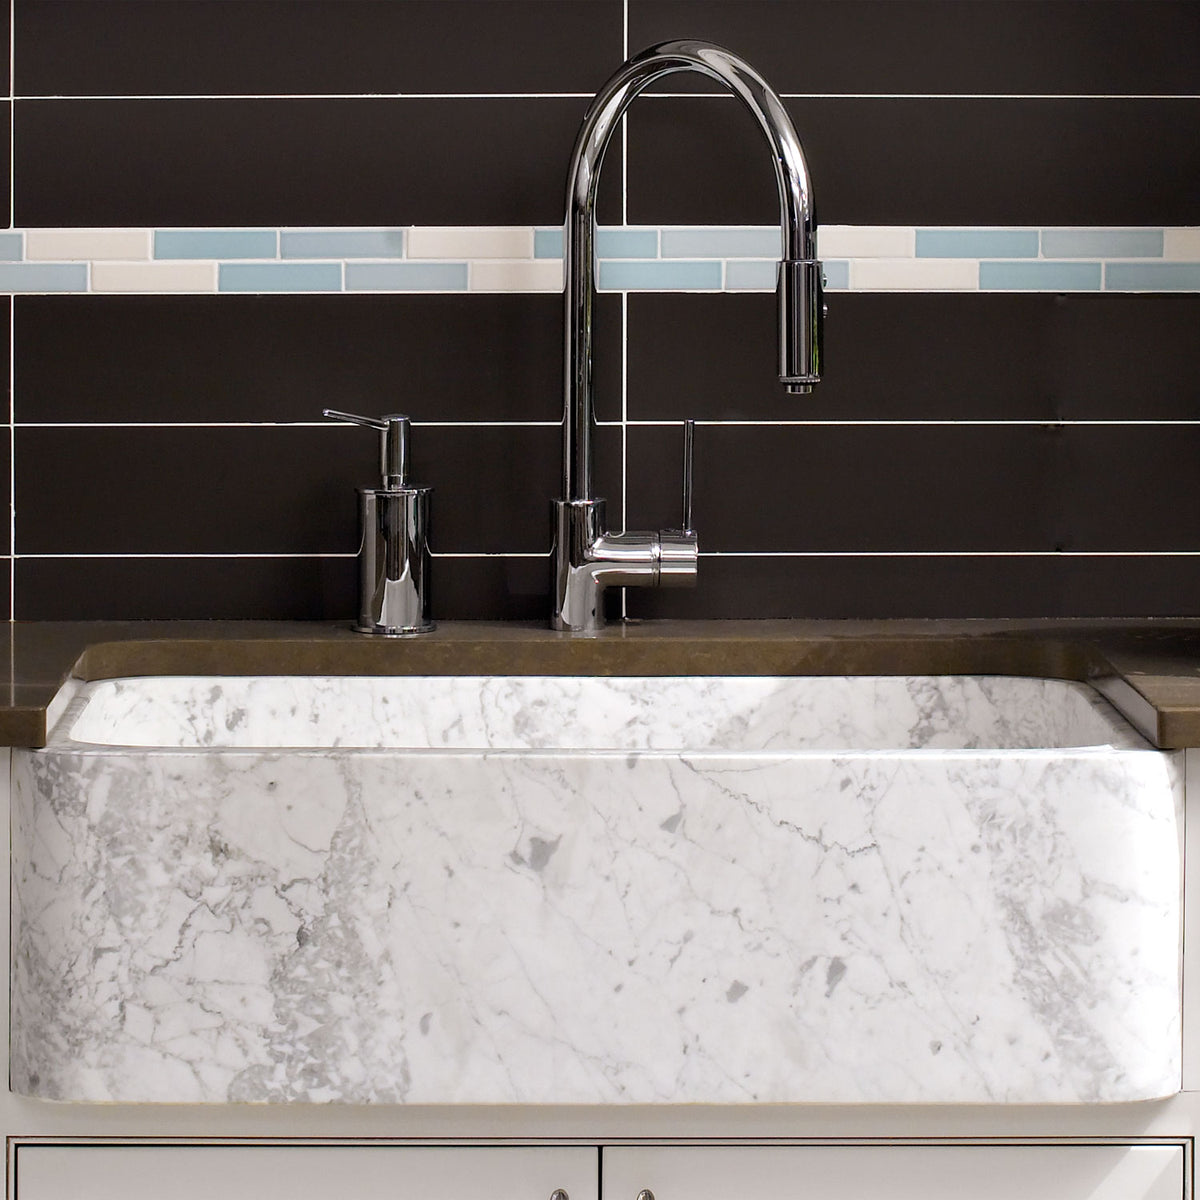 The back side of a carrara marble New Haven Farmhouse Sink has a smooth polished finish that can face forward.  image 3 of 3